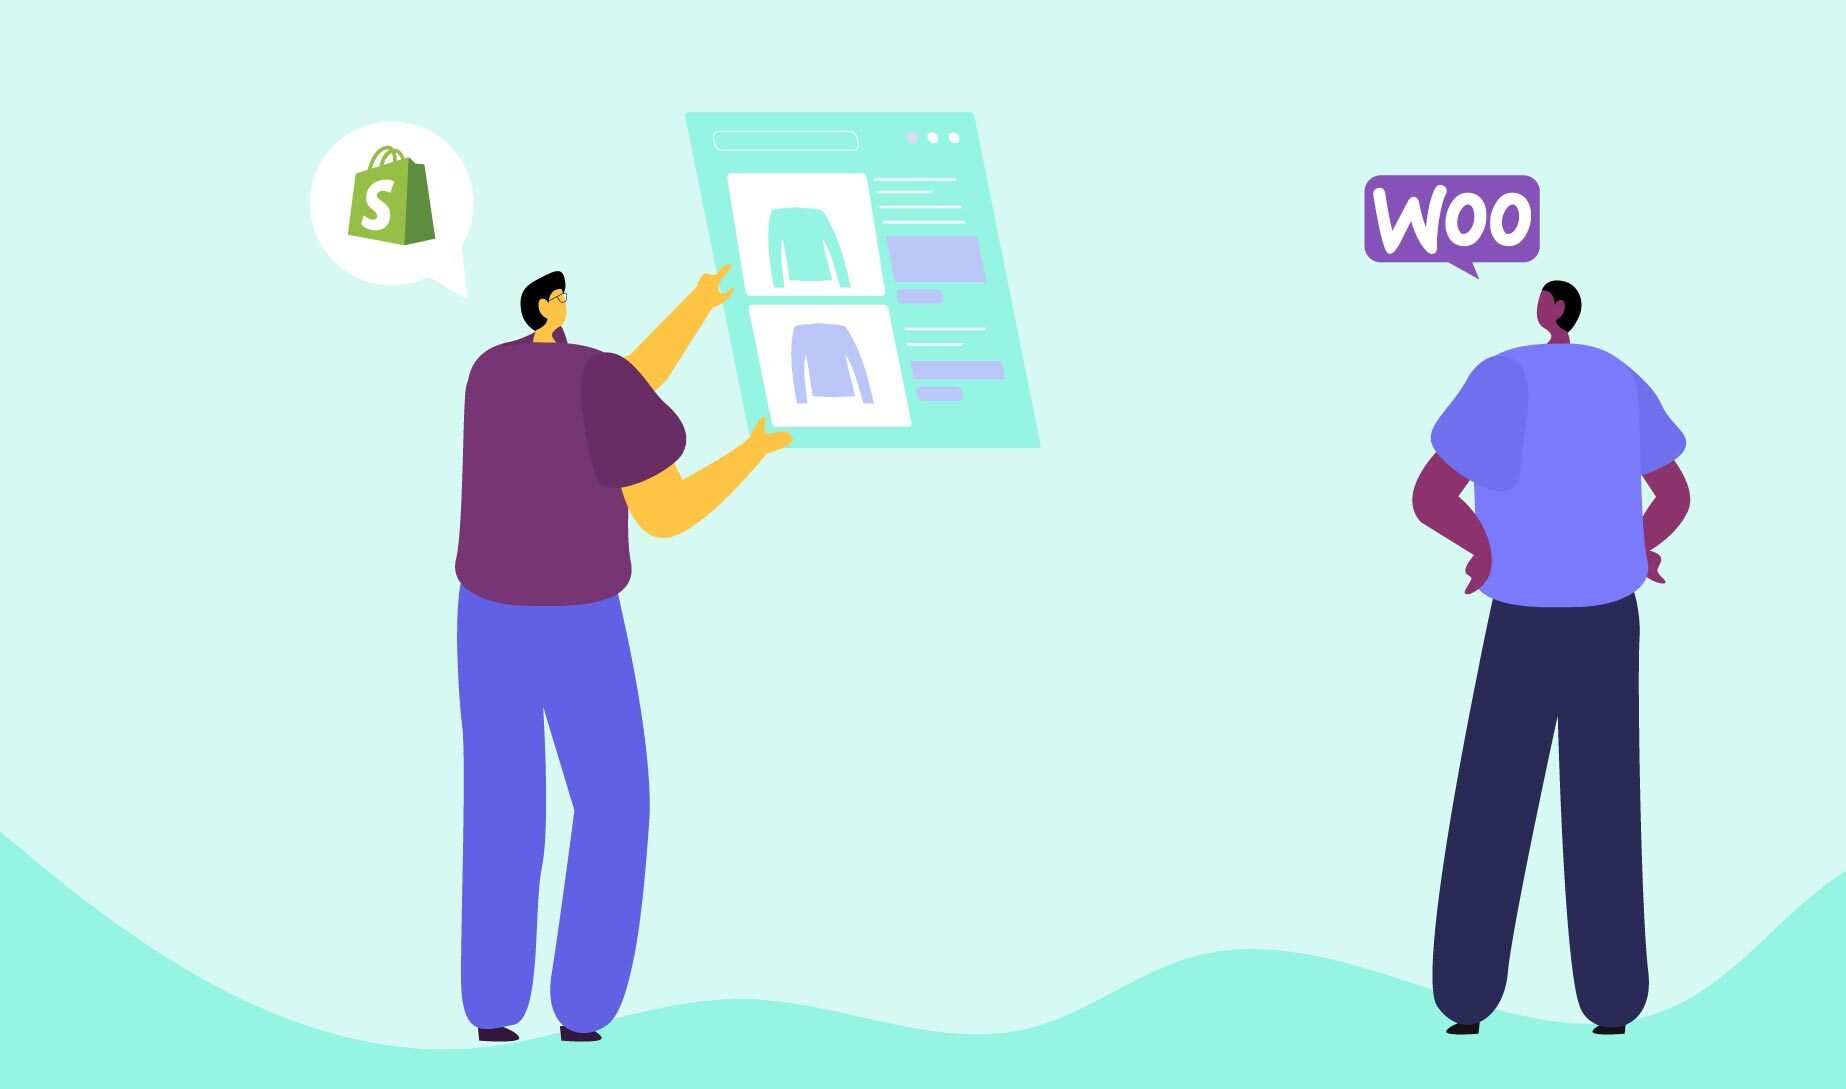 WooCommerce vs. Shopify: Which Platform is Best For Resellers?